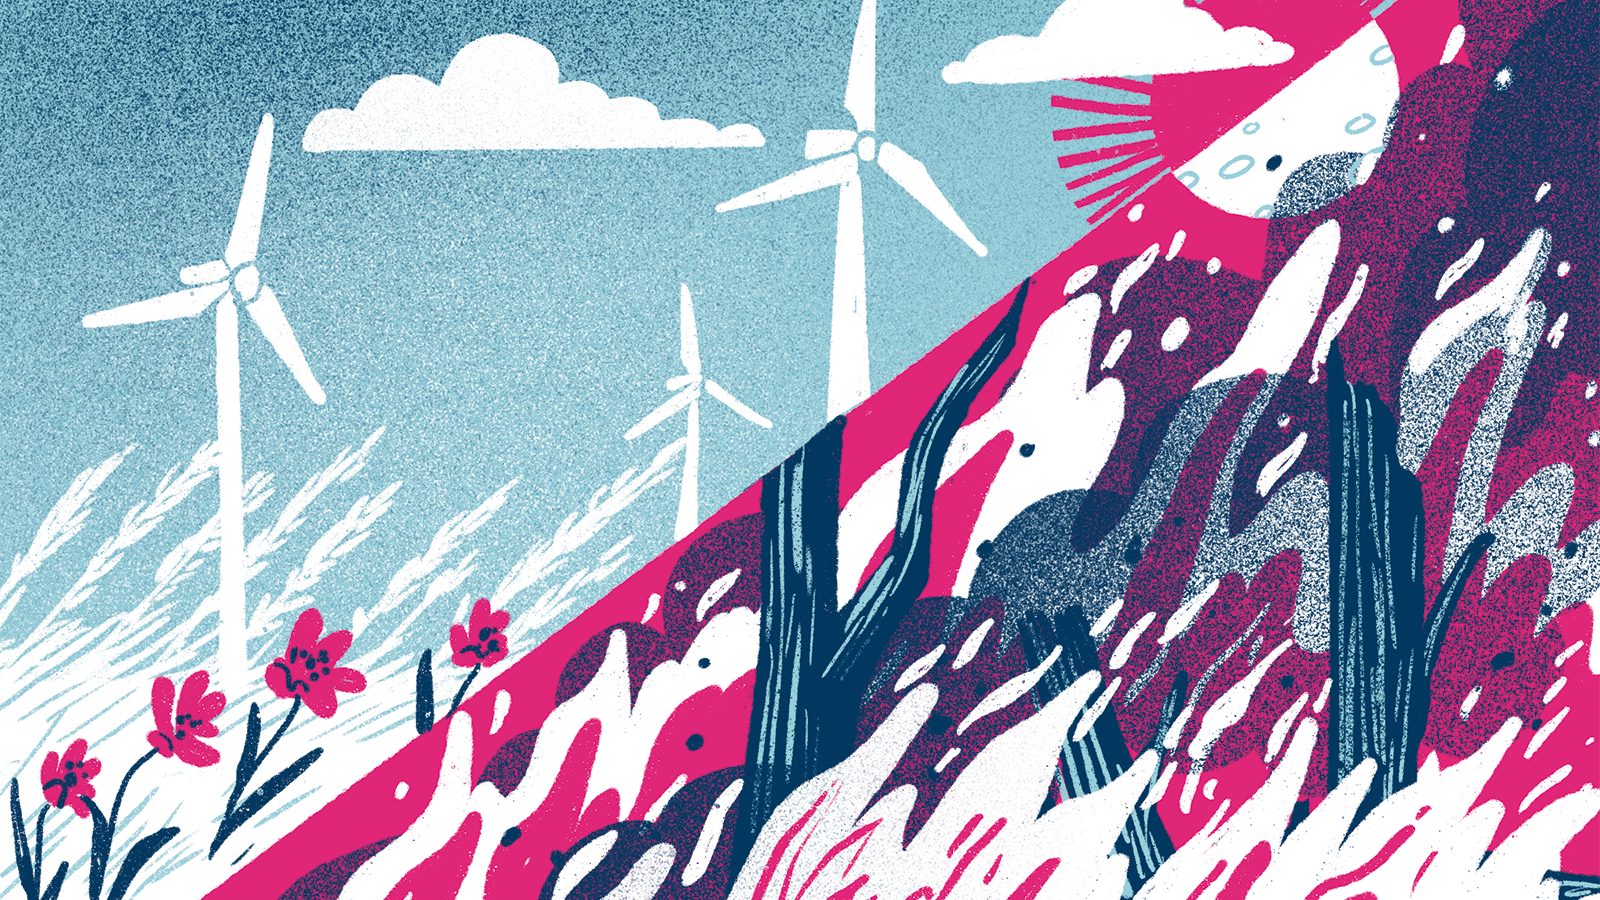 An illustration of 2 different climates, one with windmills to showcase new environmental tech